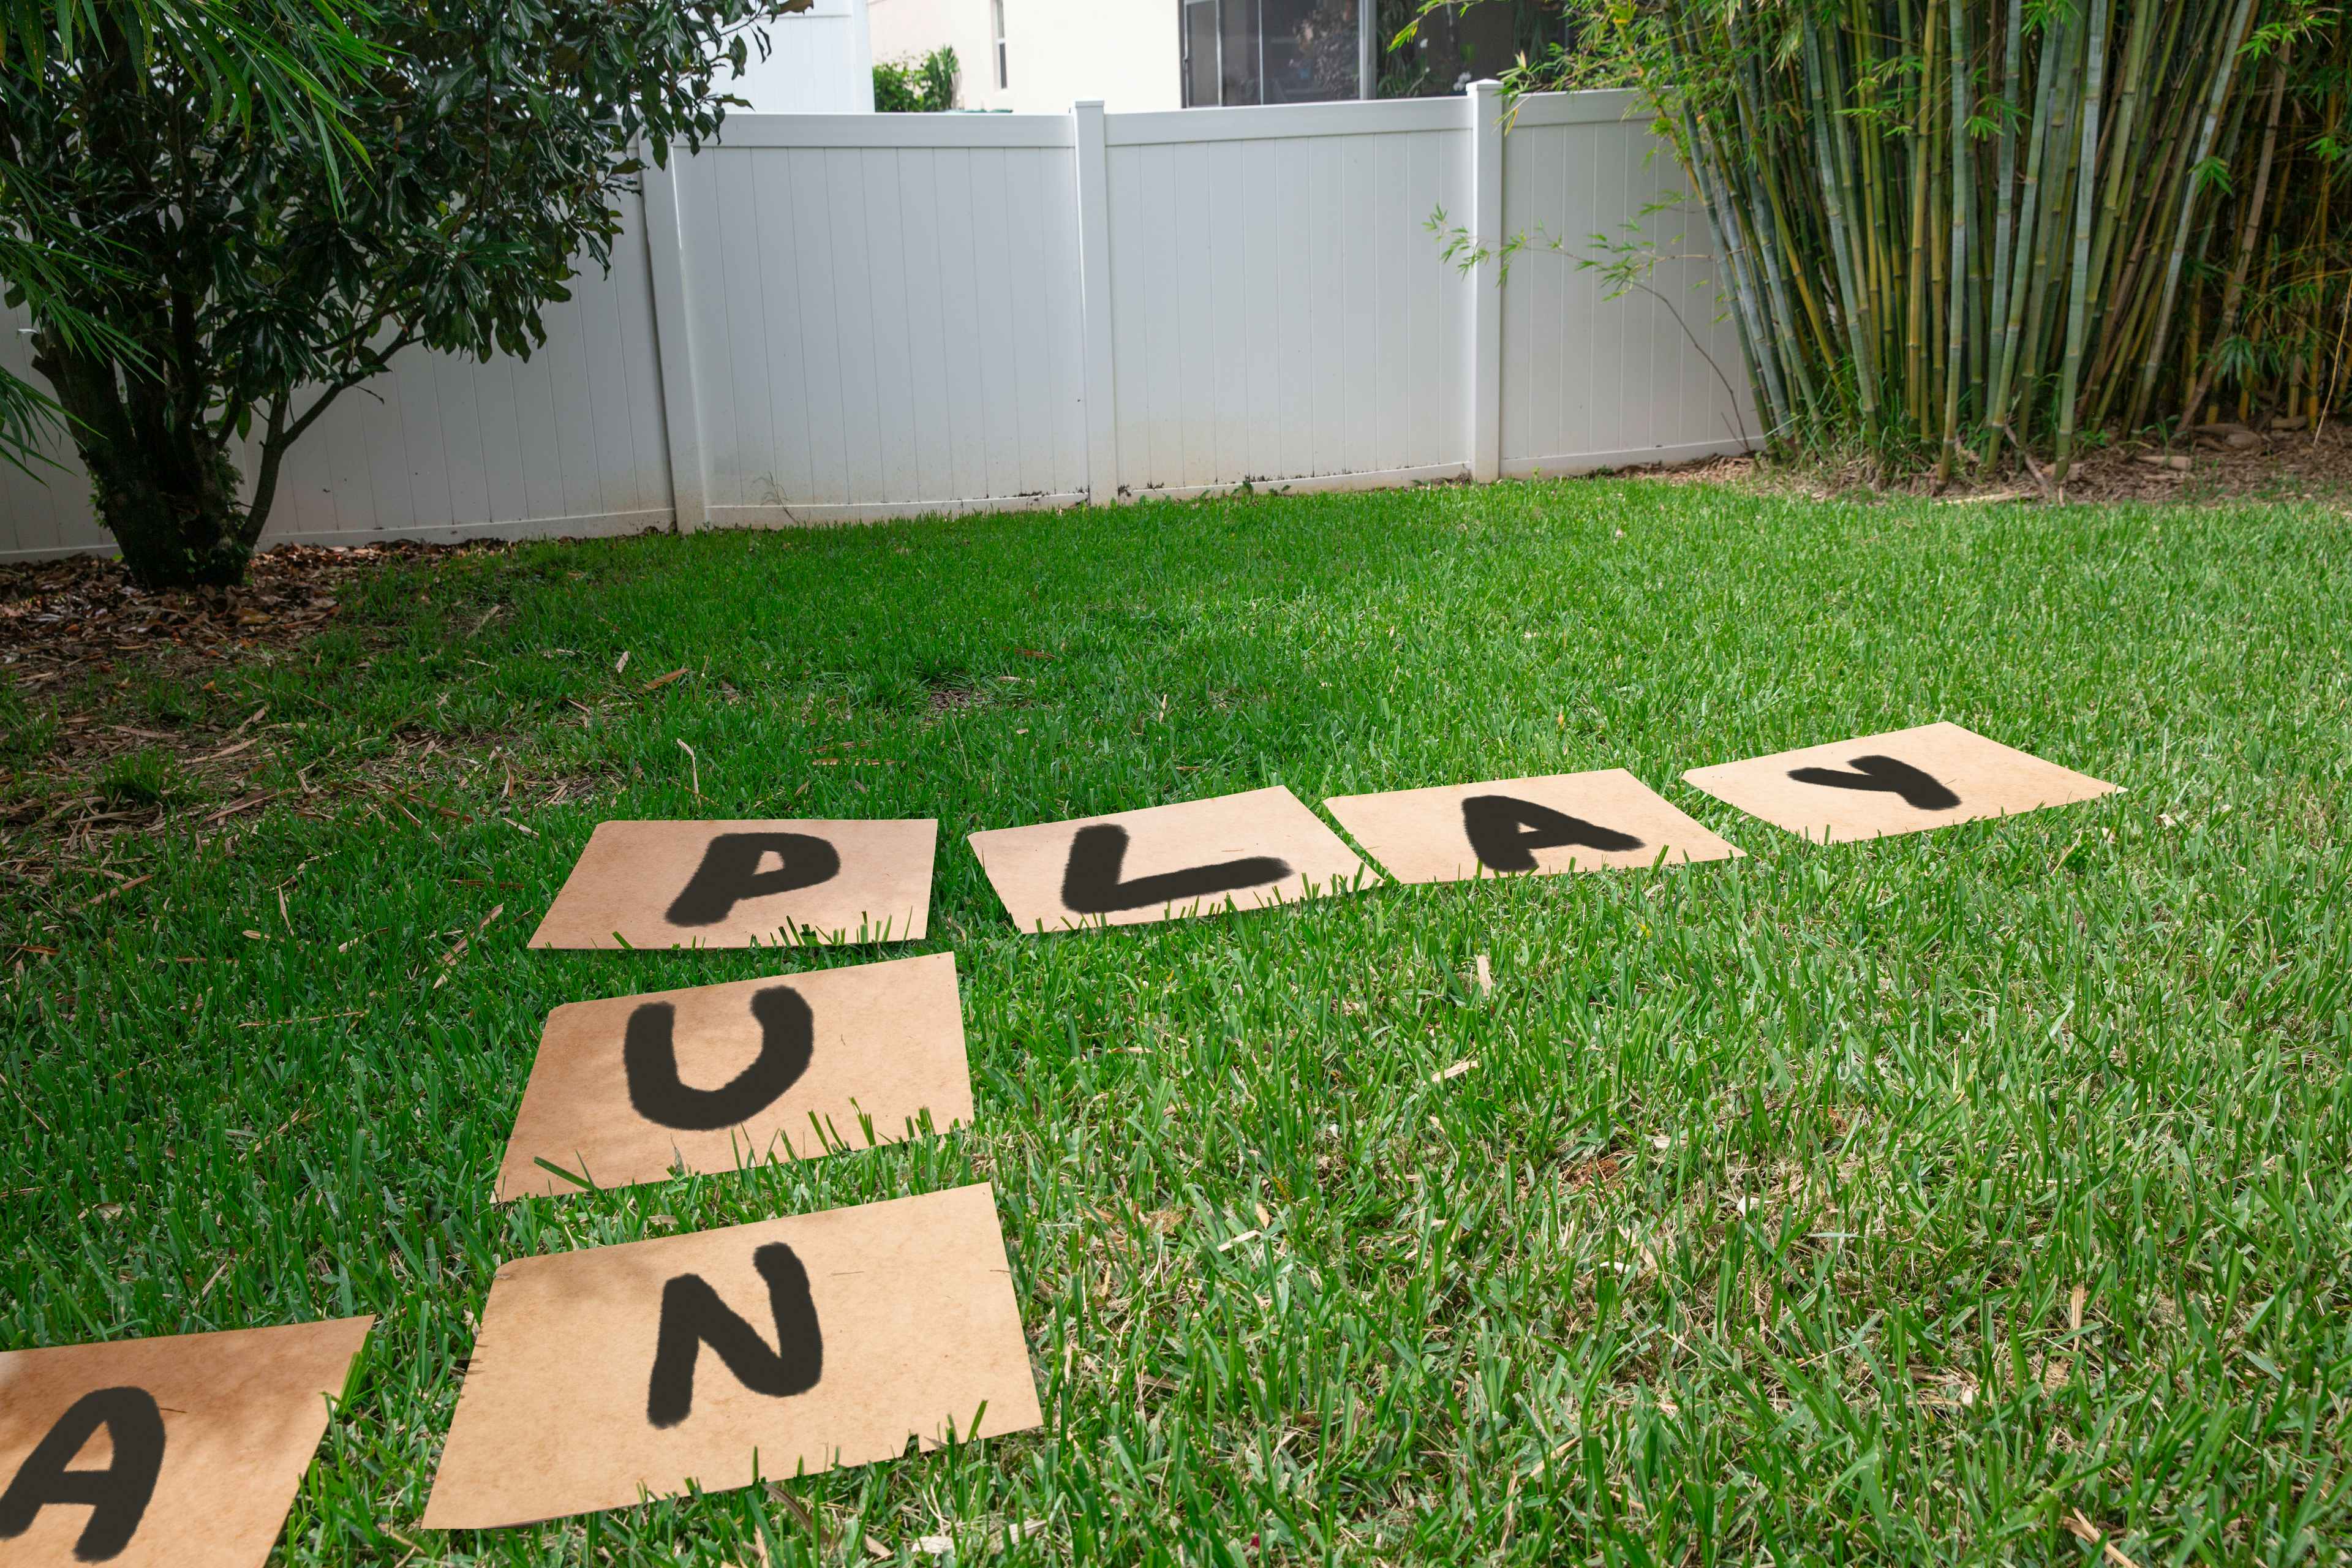 large carboard squares in a grassy backyard